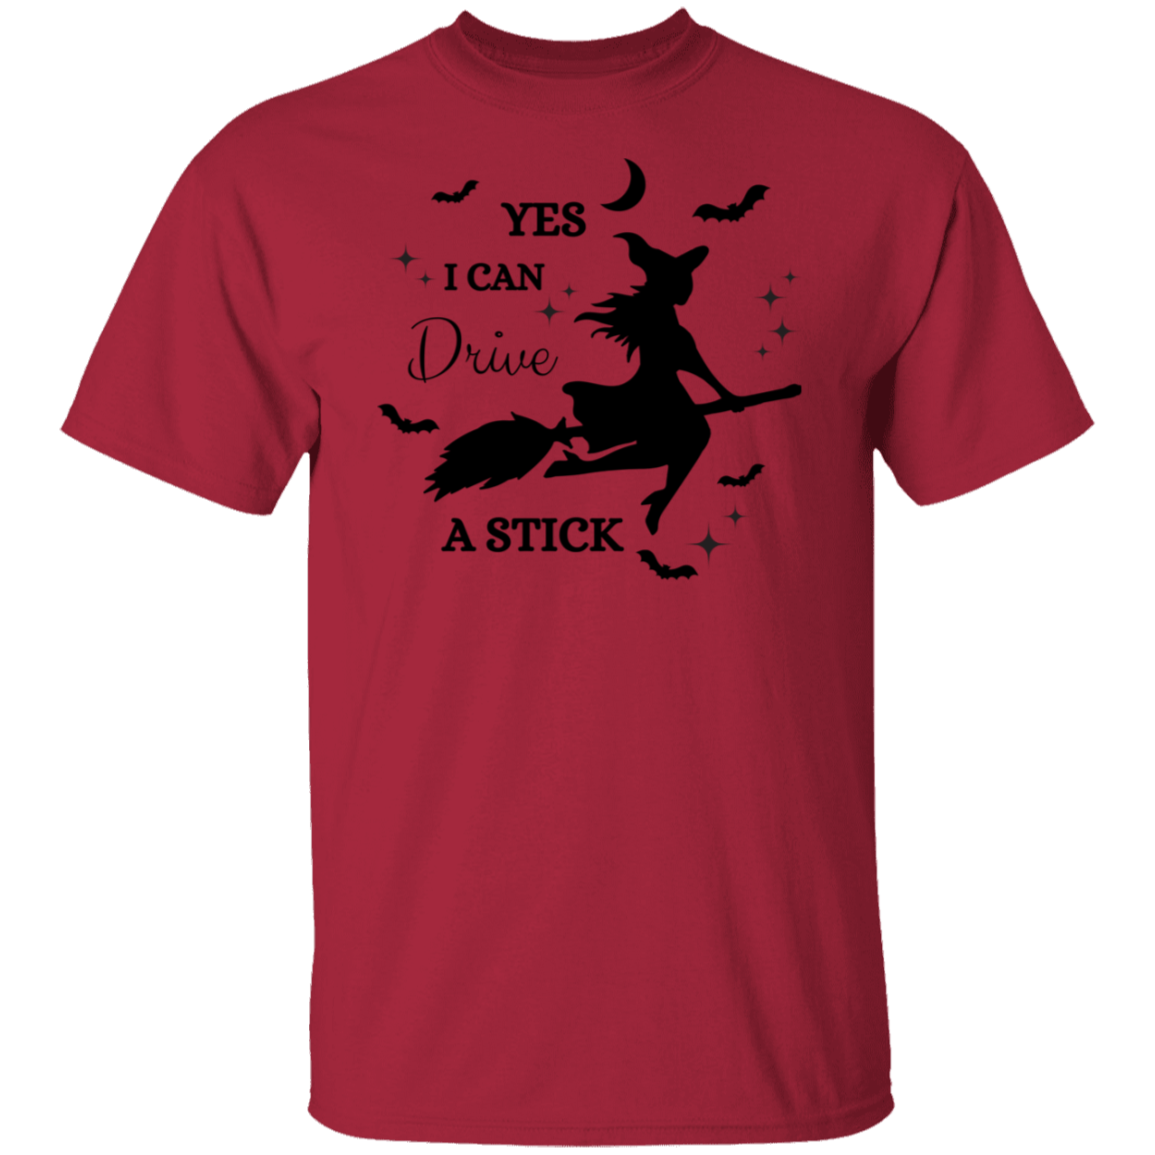 Yes I Can Drive a Stick G500 5.3 oz. T-Shirt